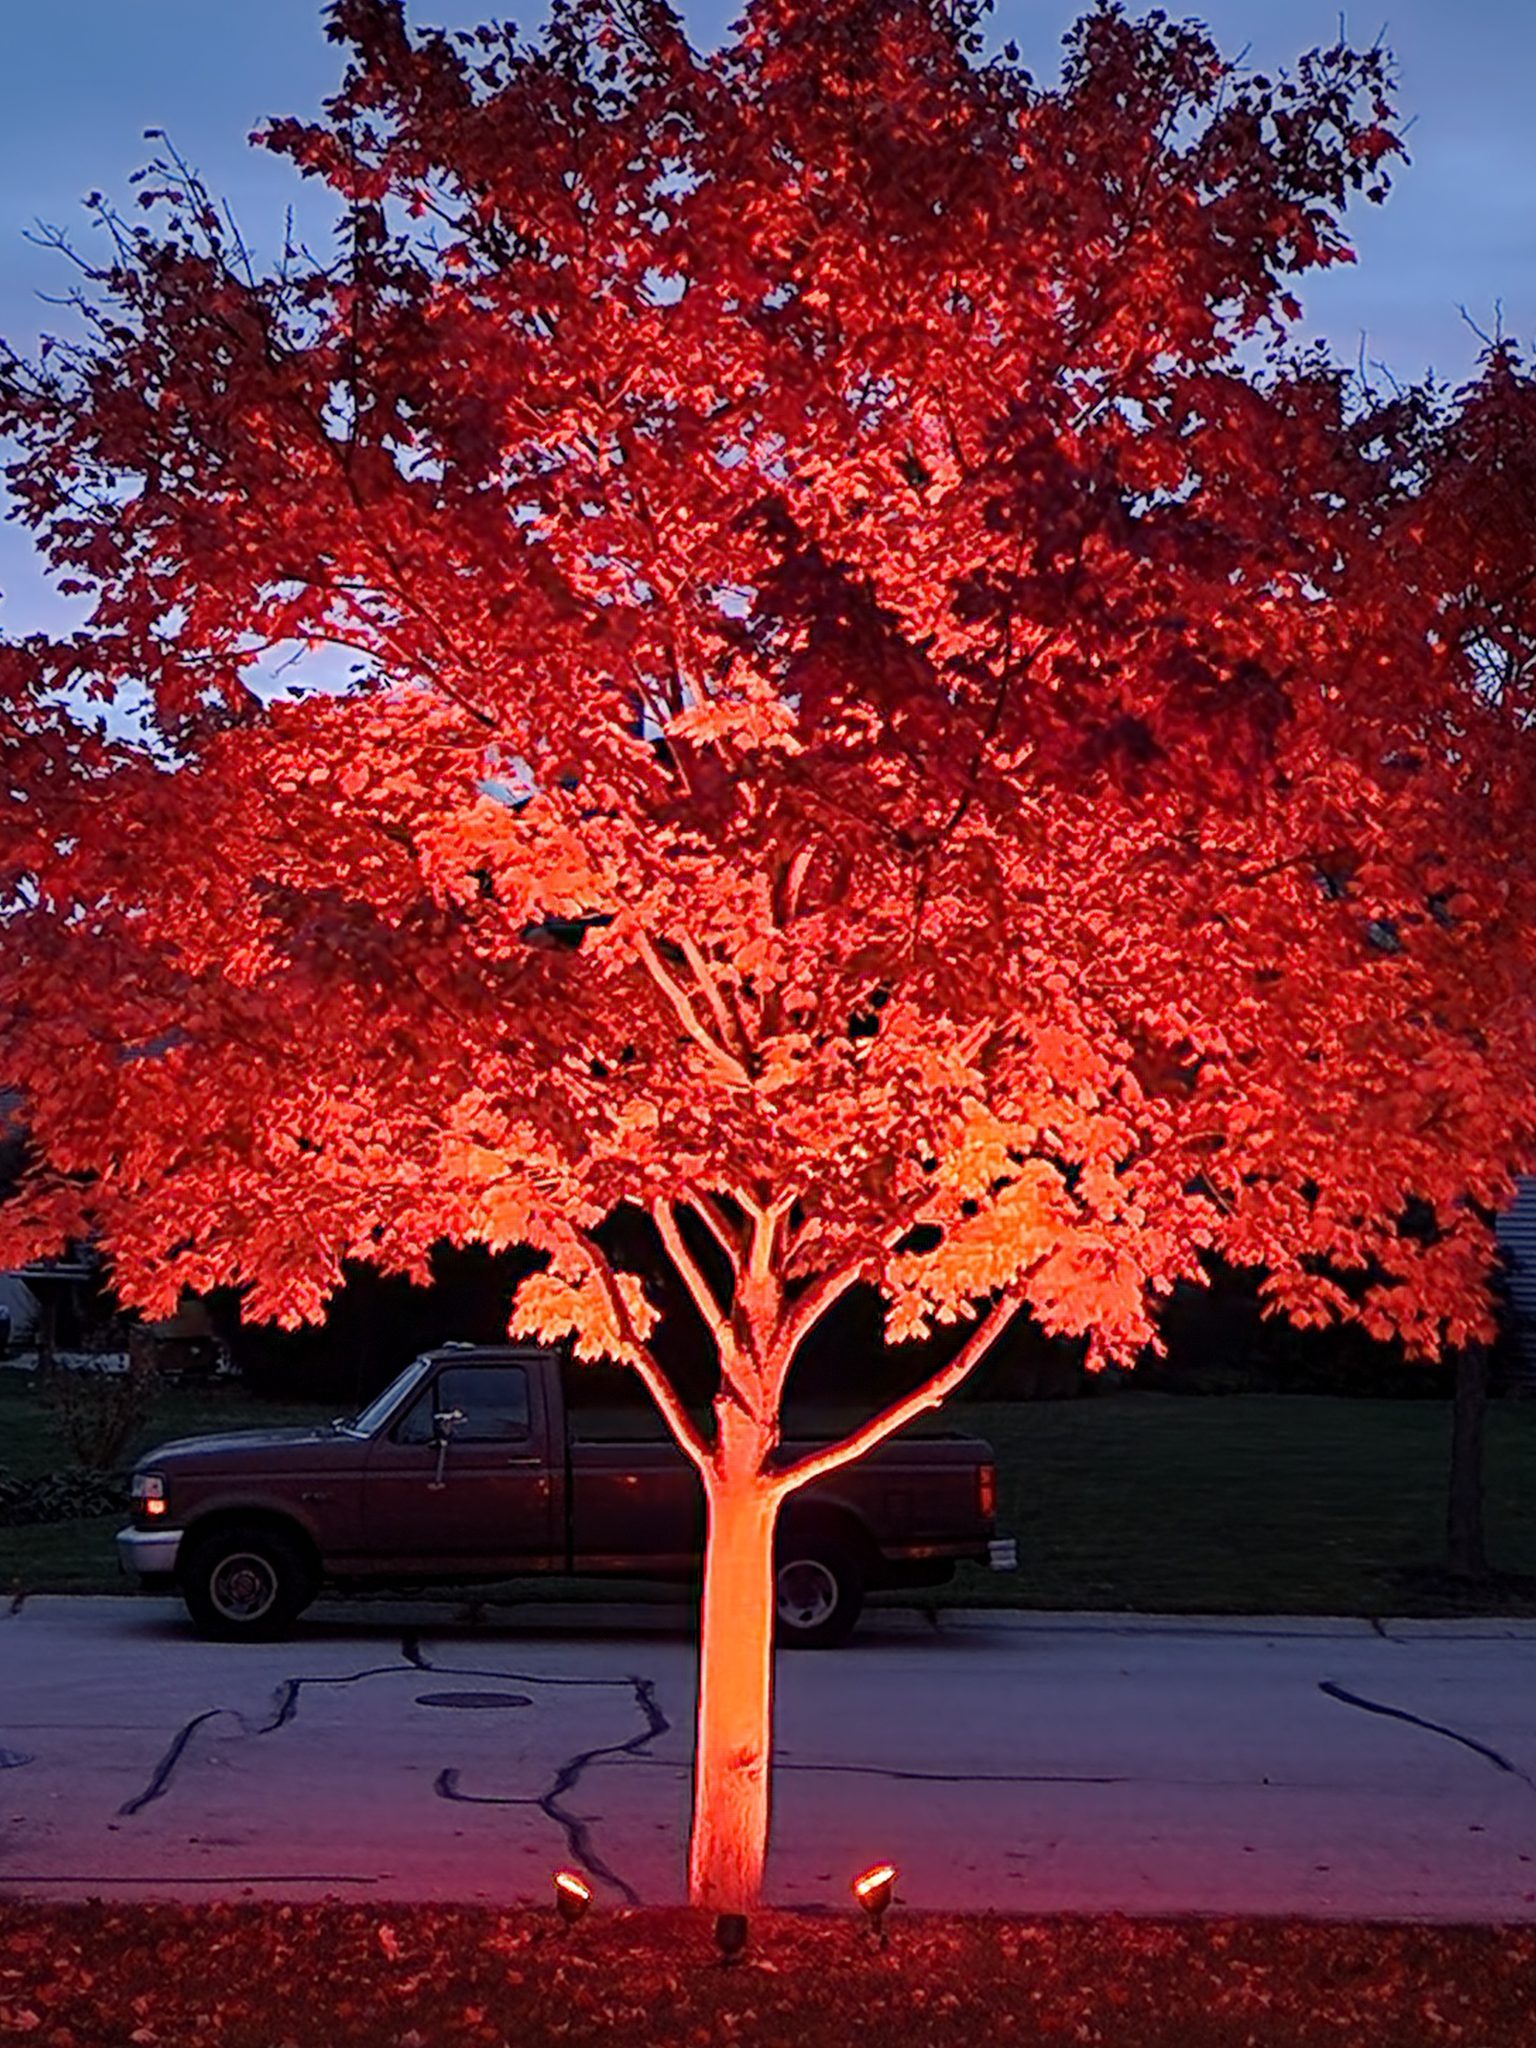 enhancing your outdoor space with landscape lighting in the fall, 3 ways to enjoy your outdoor space in the fall